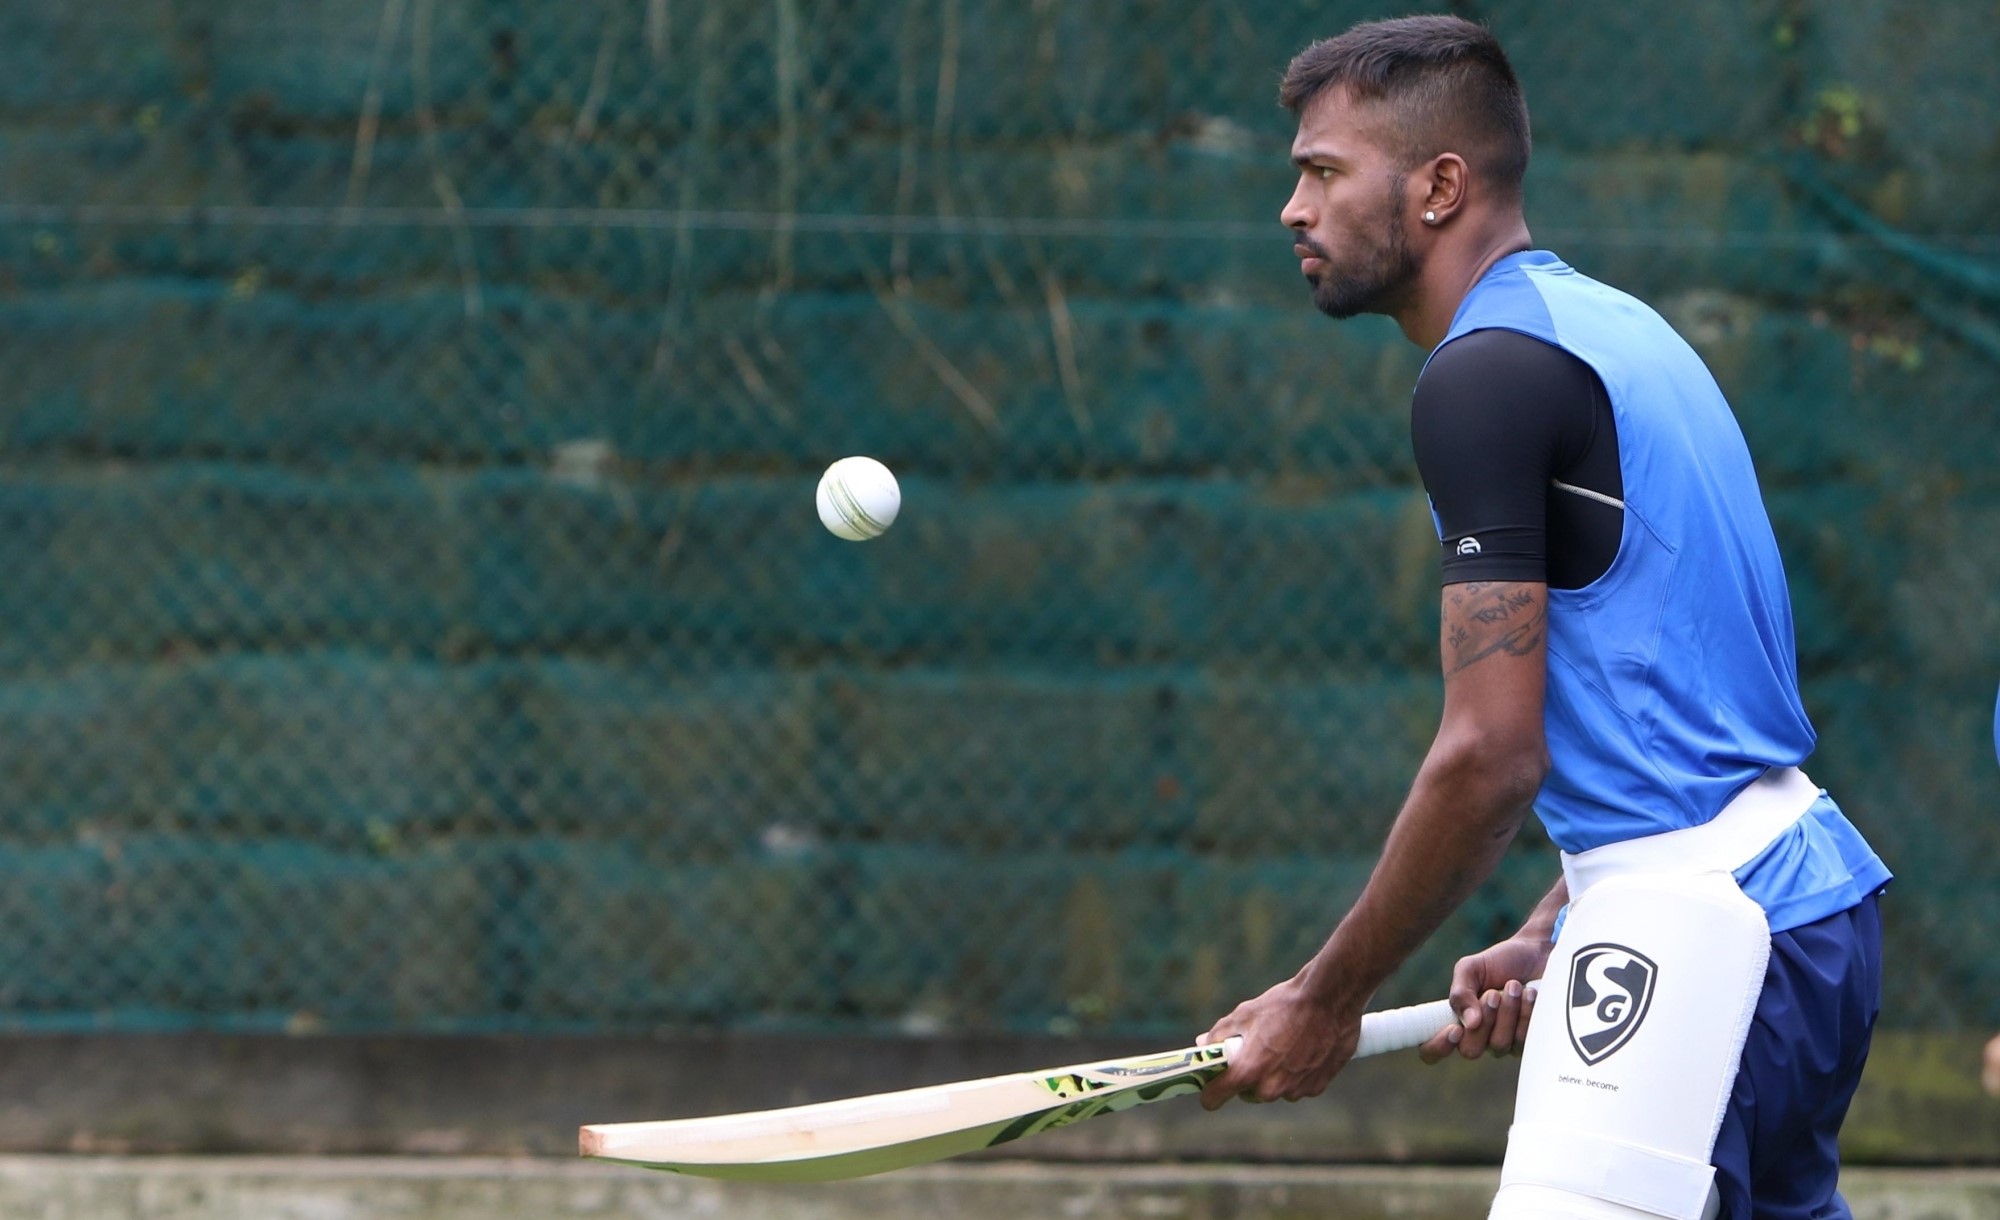 Hardik keen to bowl, but we need to listen to his body: Zaheer